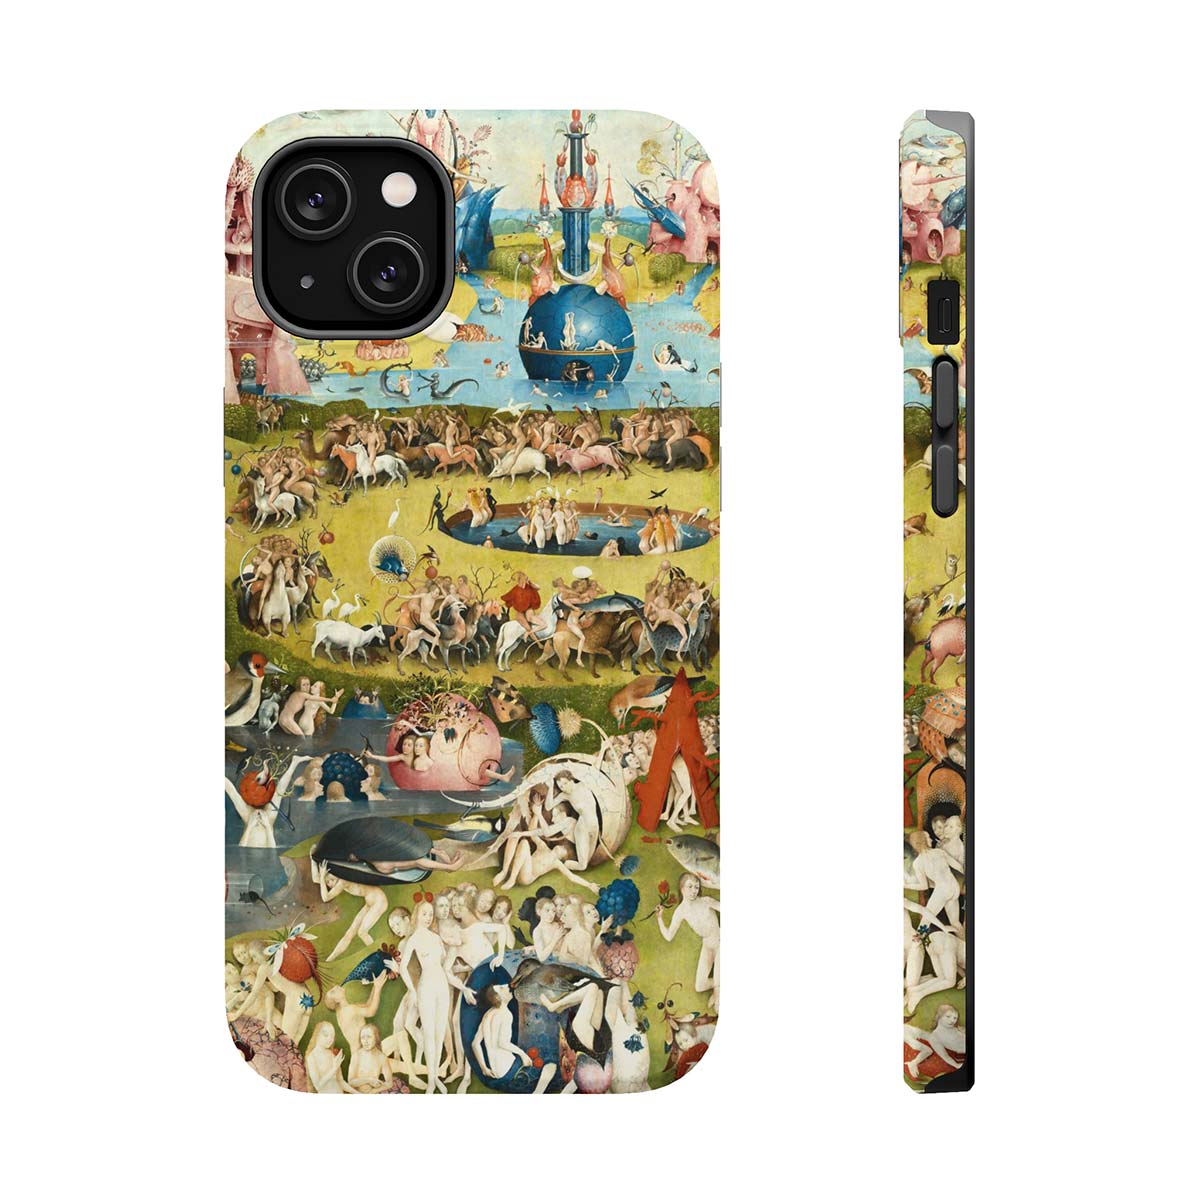 iPhone Case for Art Lovers